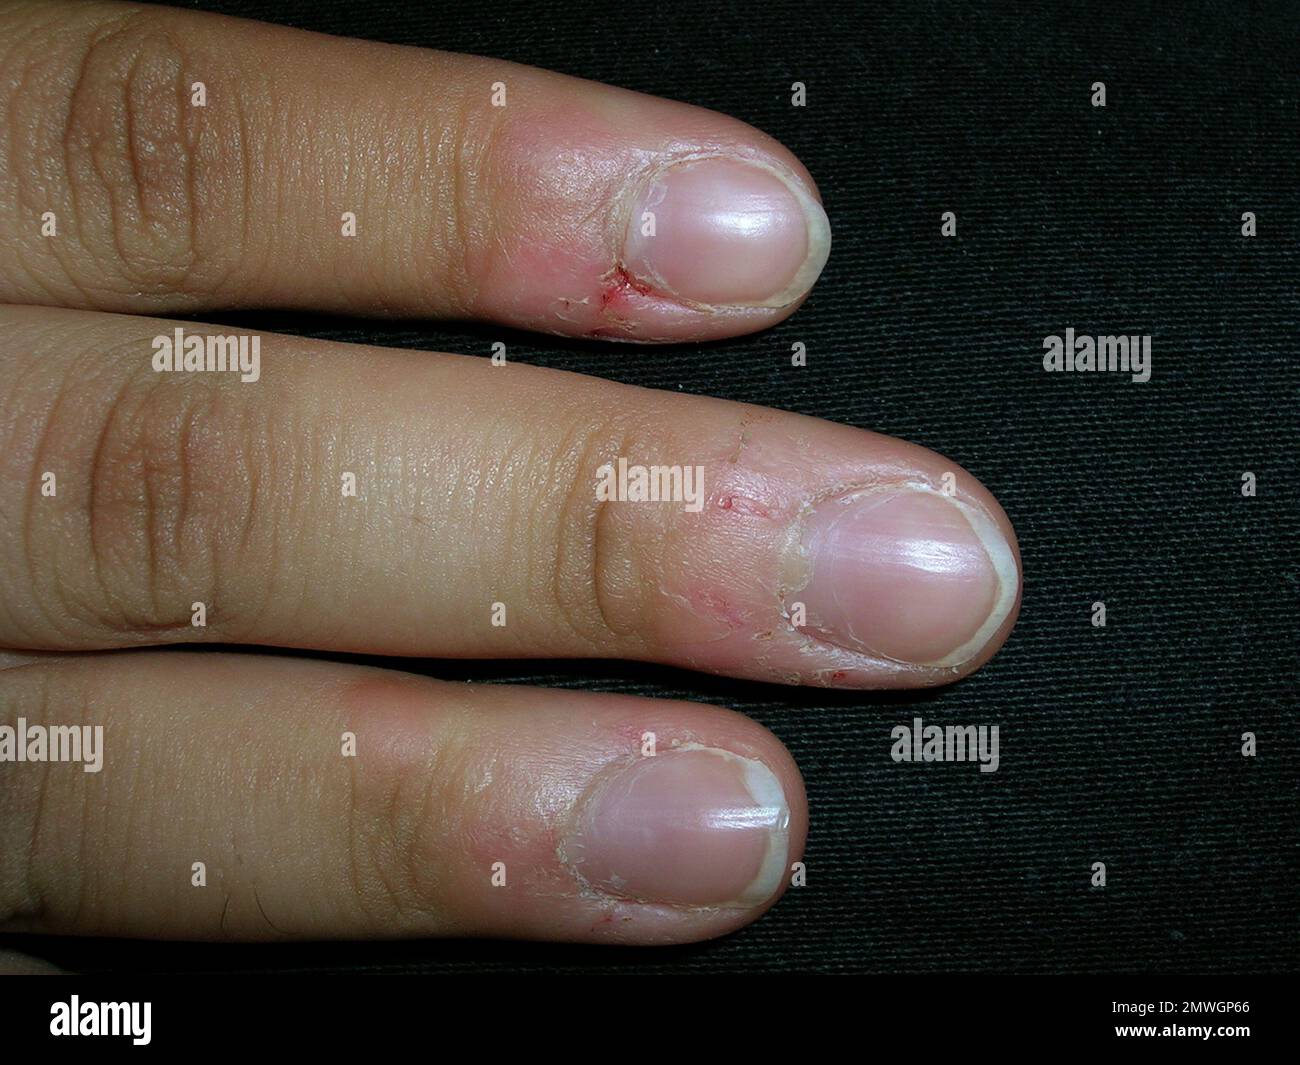 How To Stop Biting Nails: Quit Your Nail-Biting HabitHelloGiggles